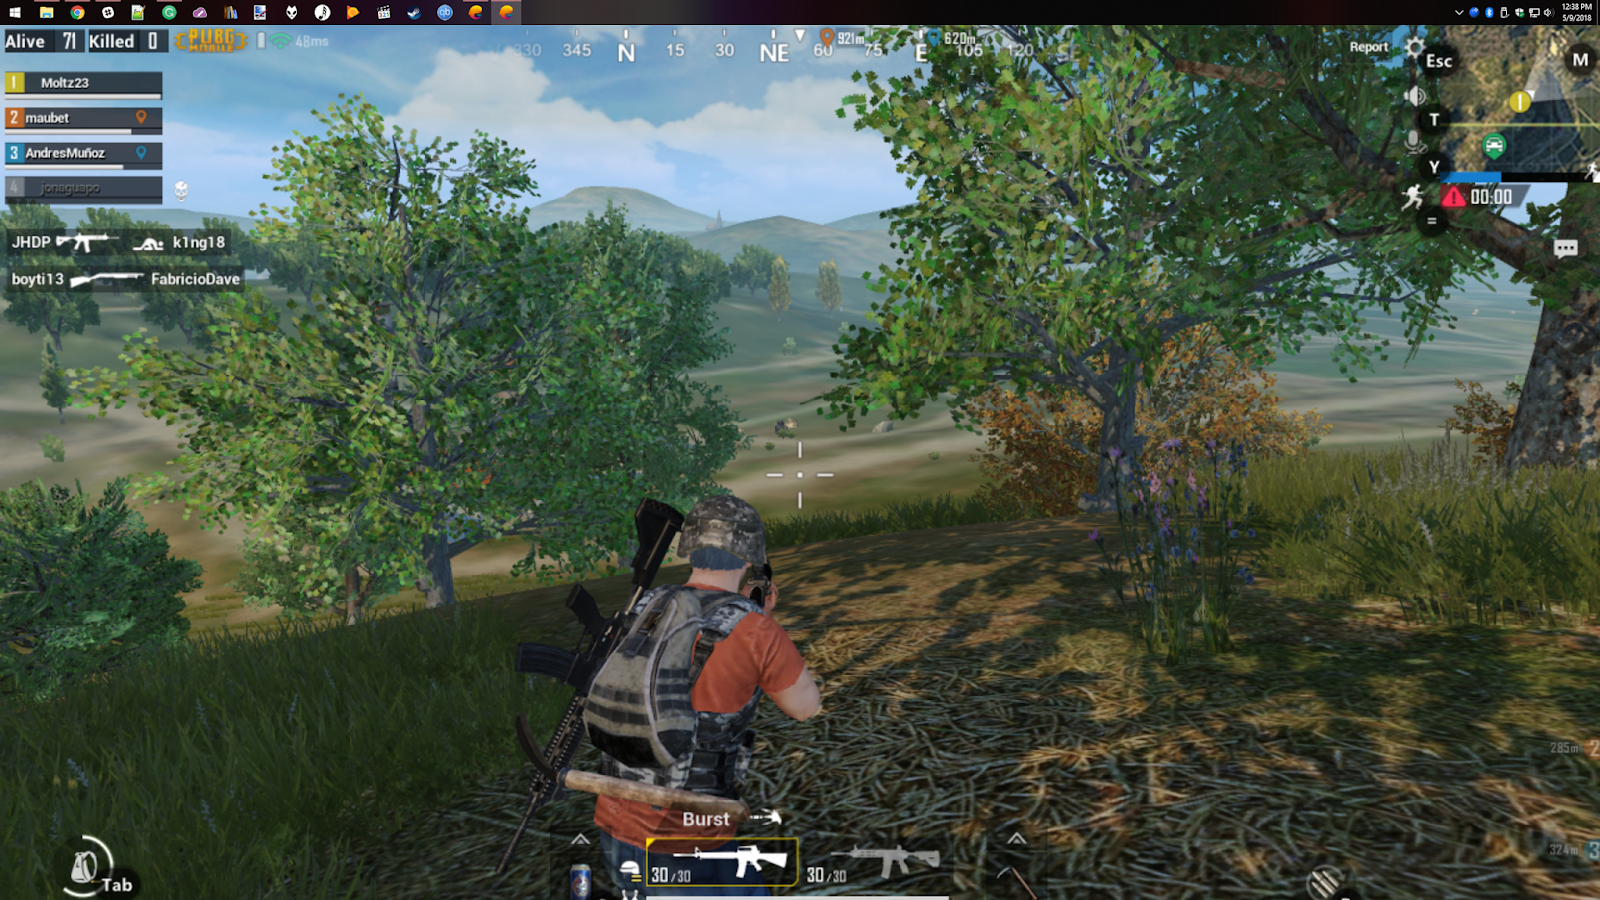 Tencent gaming buddy tencent best emulator for pubg mobile фото 51